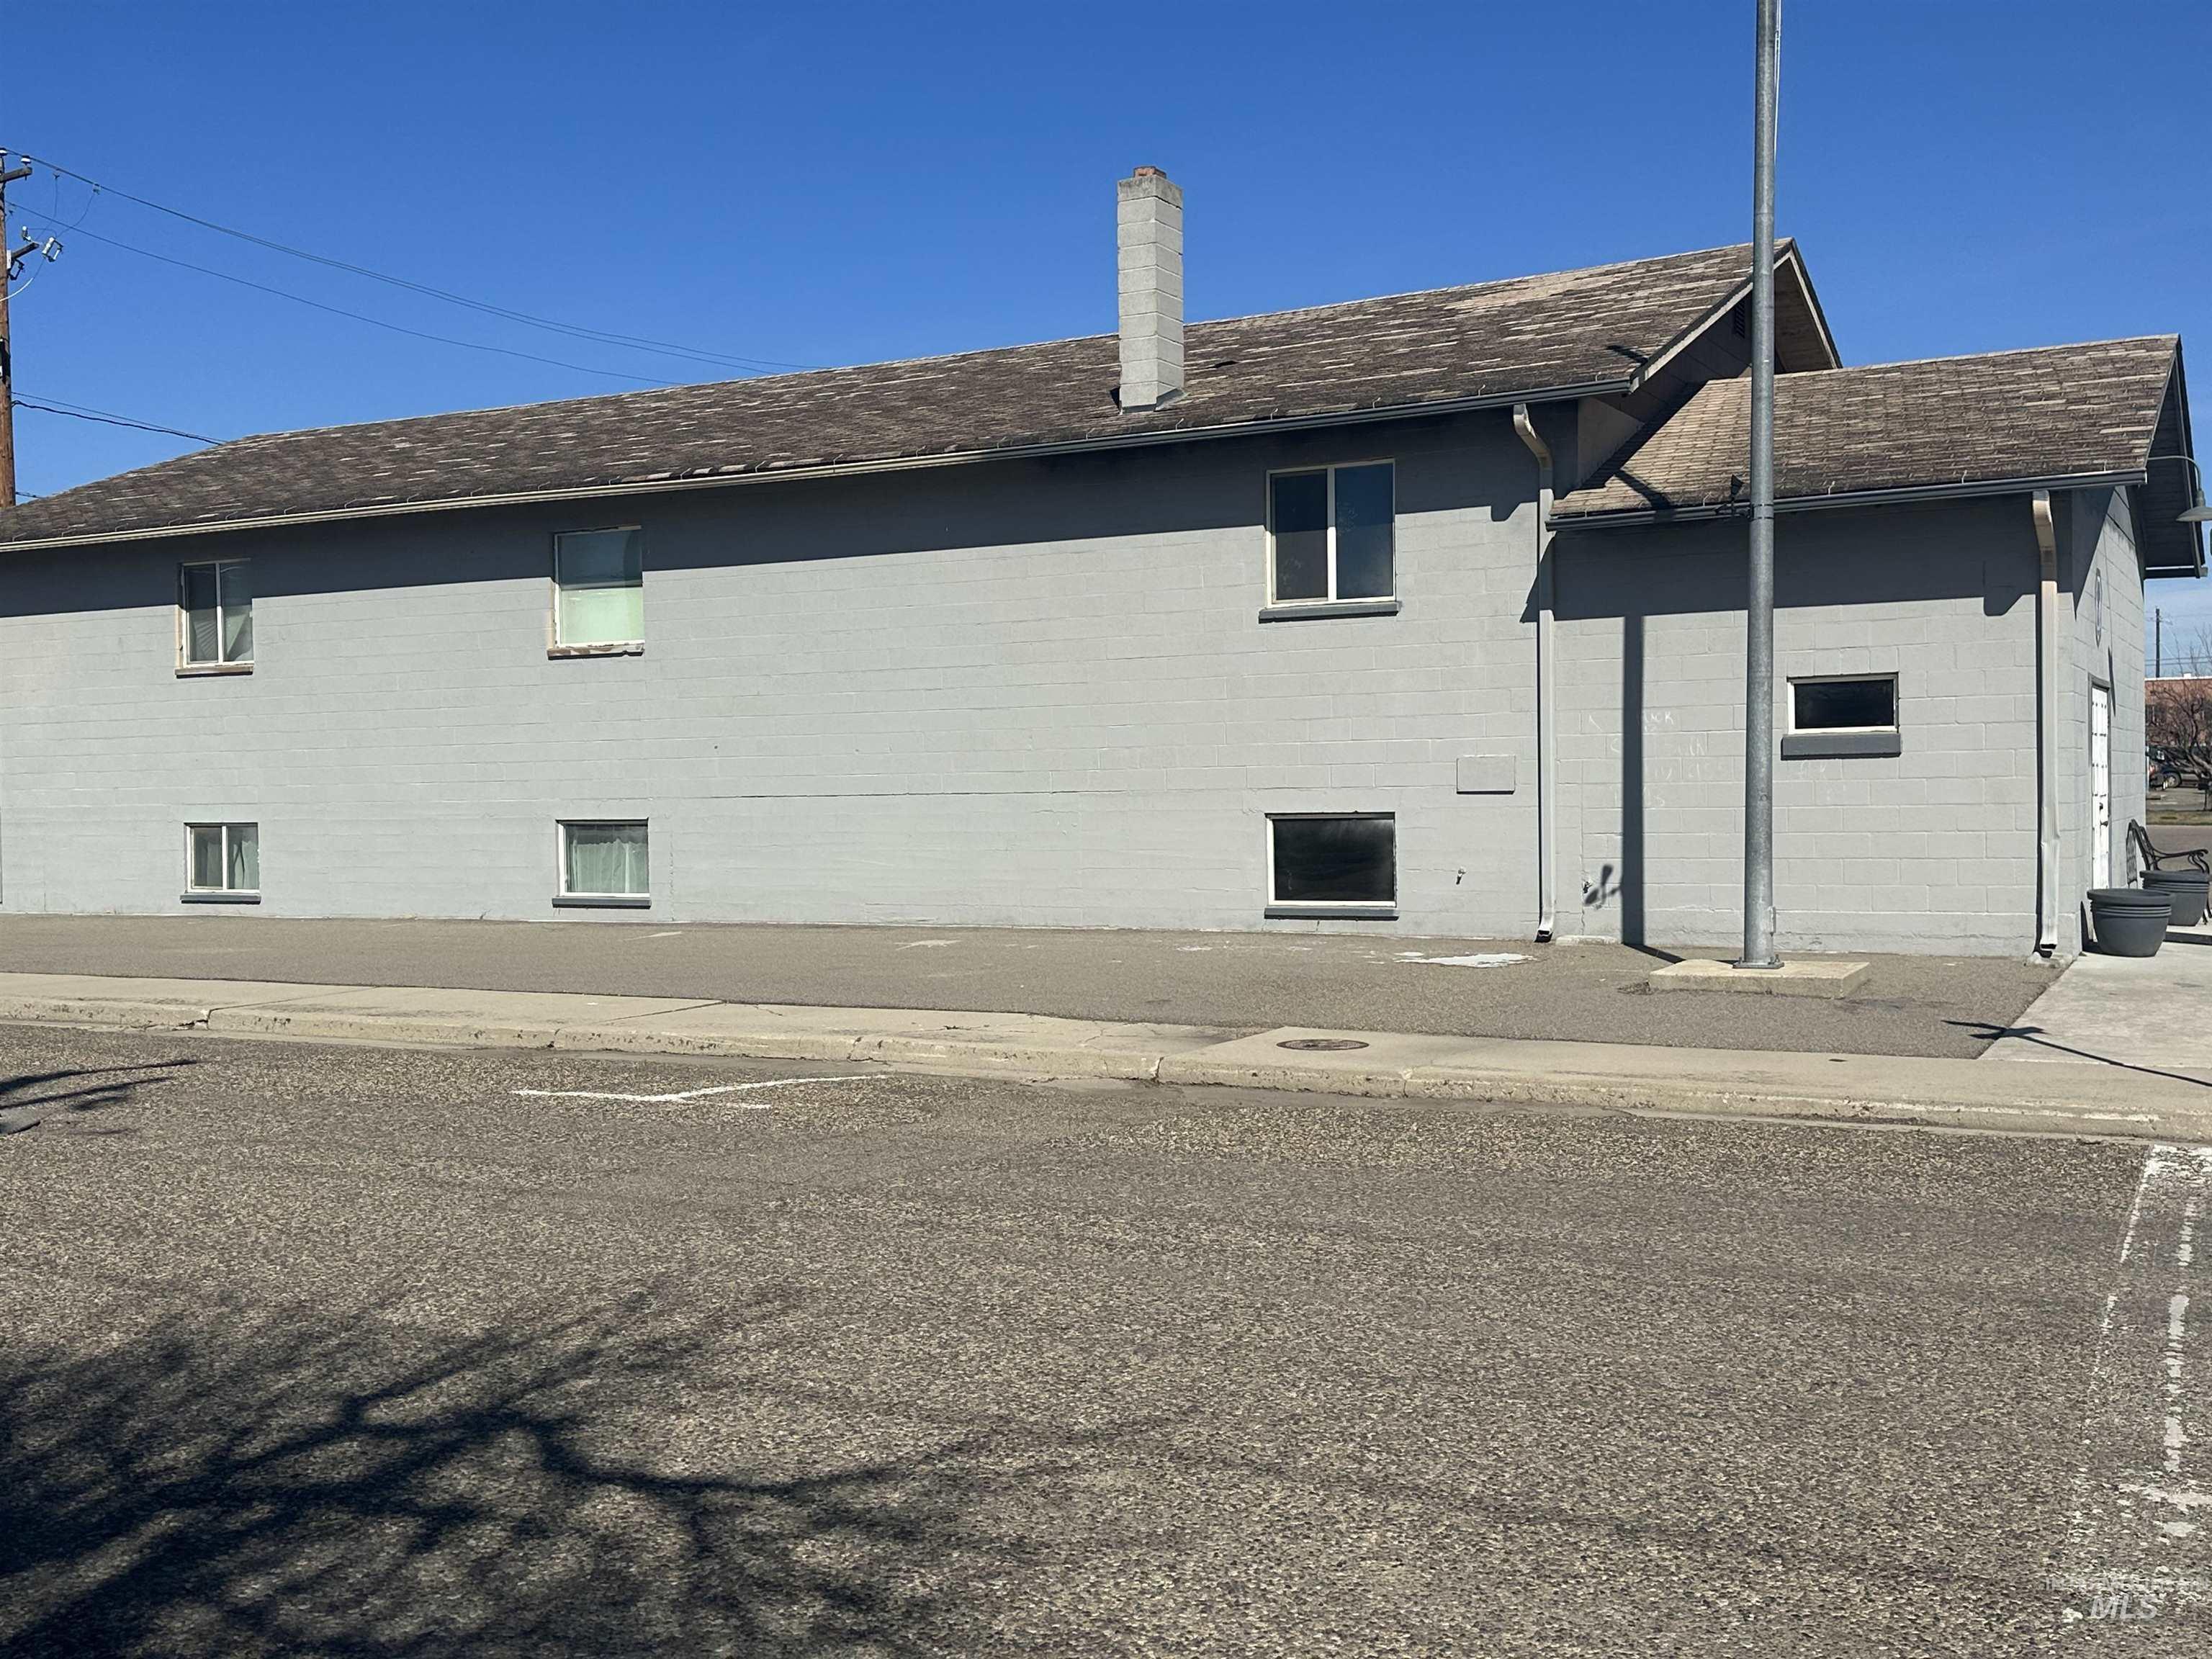 259 Longfellow St, Vale, Oregon 97918, Business/Commercial For Sale, Price $300,000,MLS 98903980